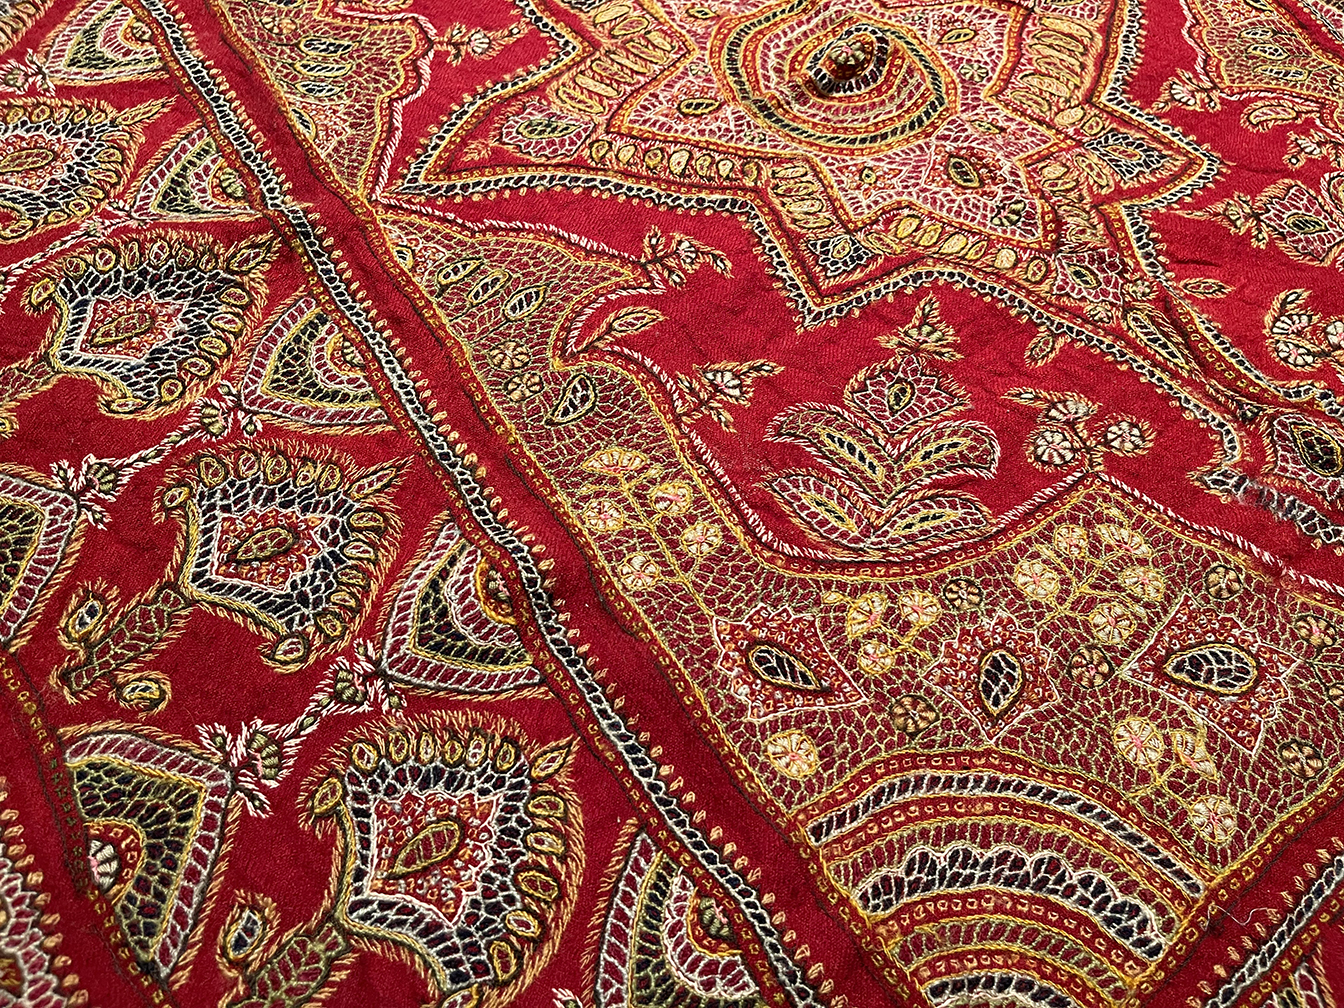 Antique embroidery Rug - # 56097